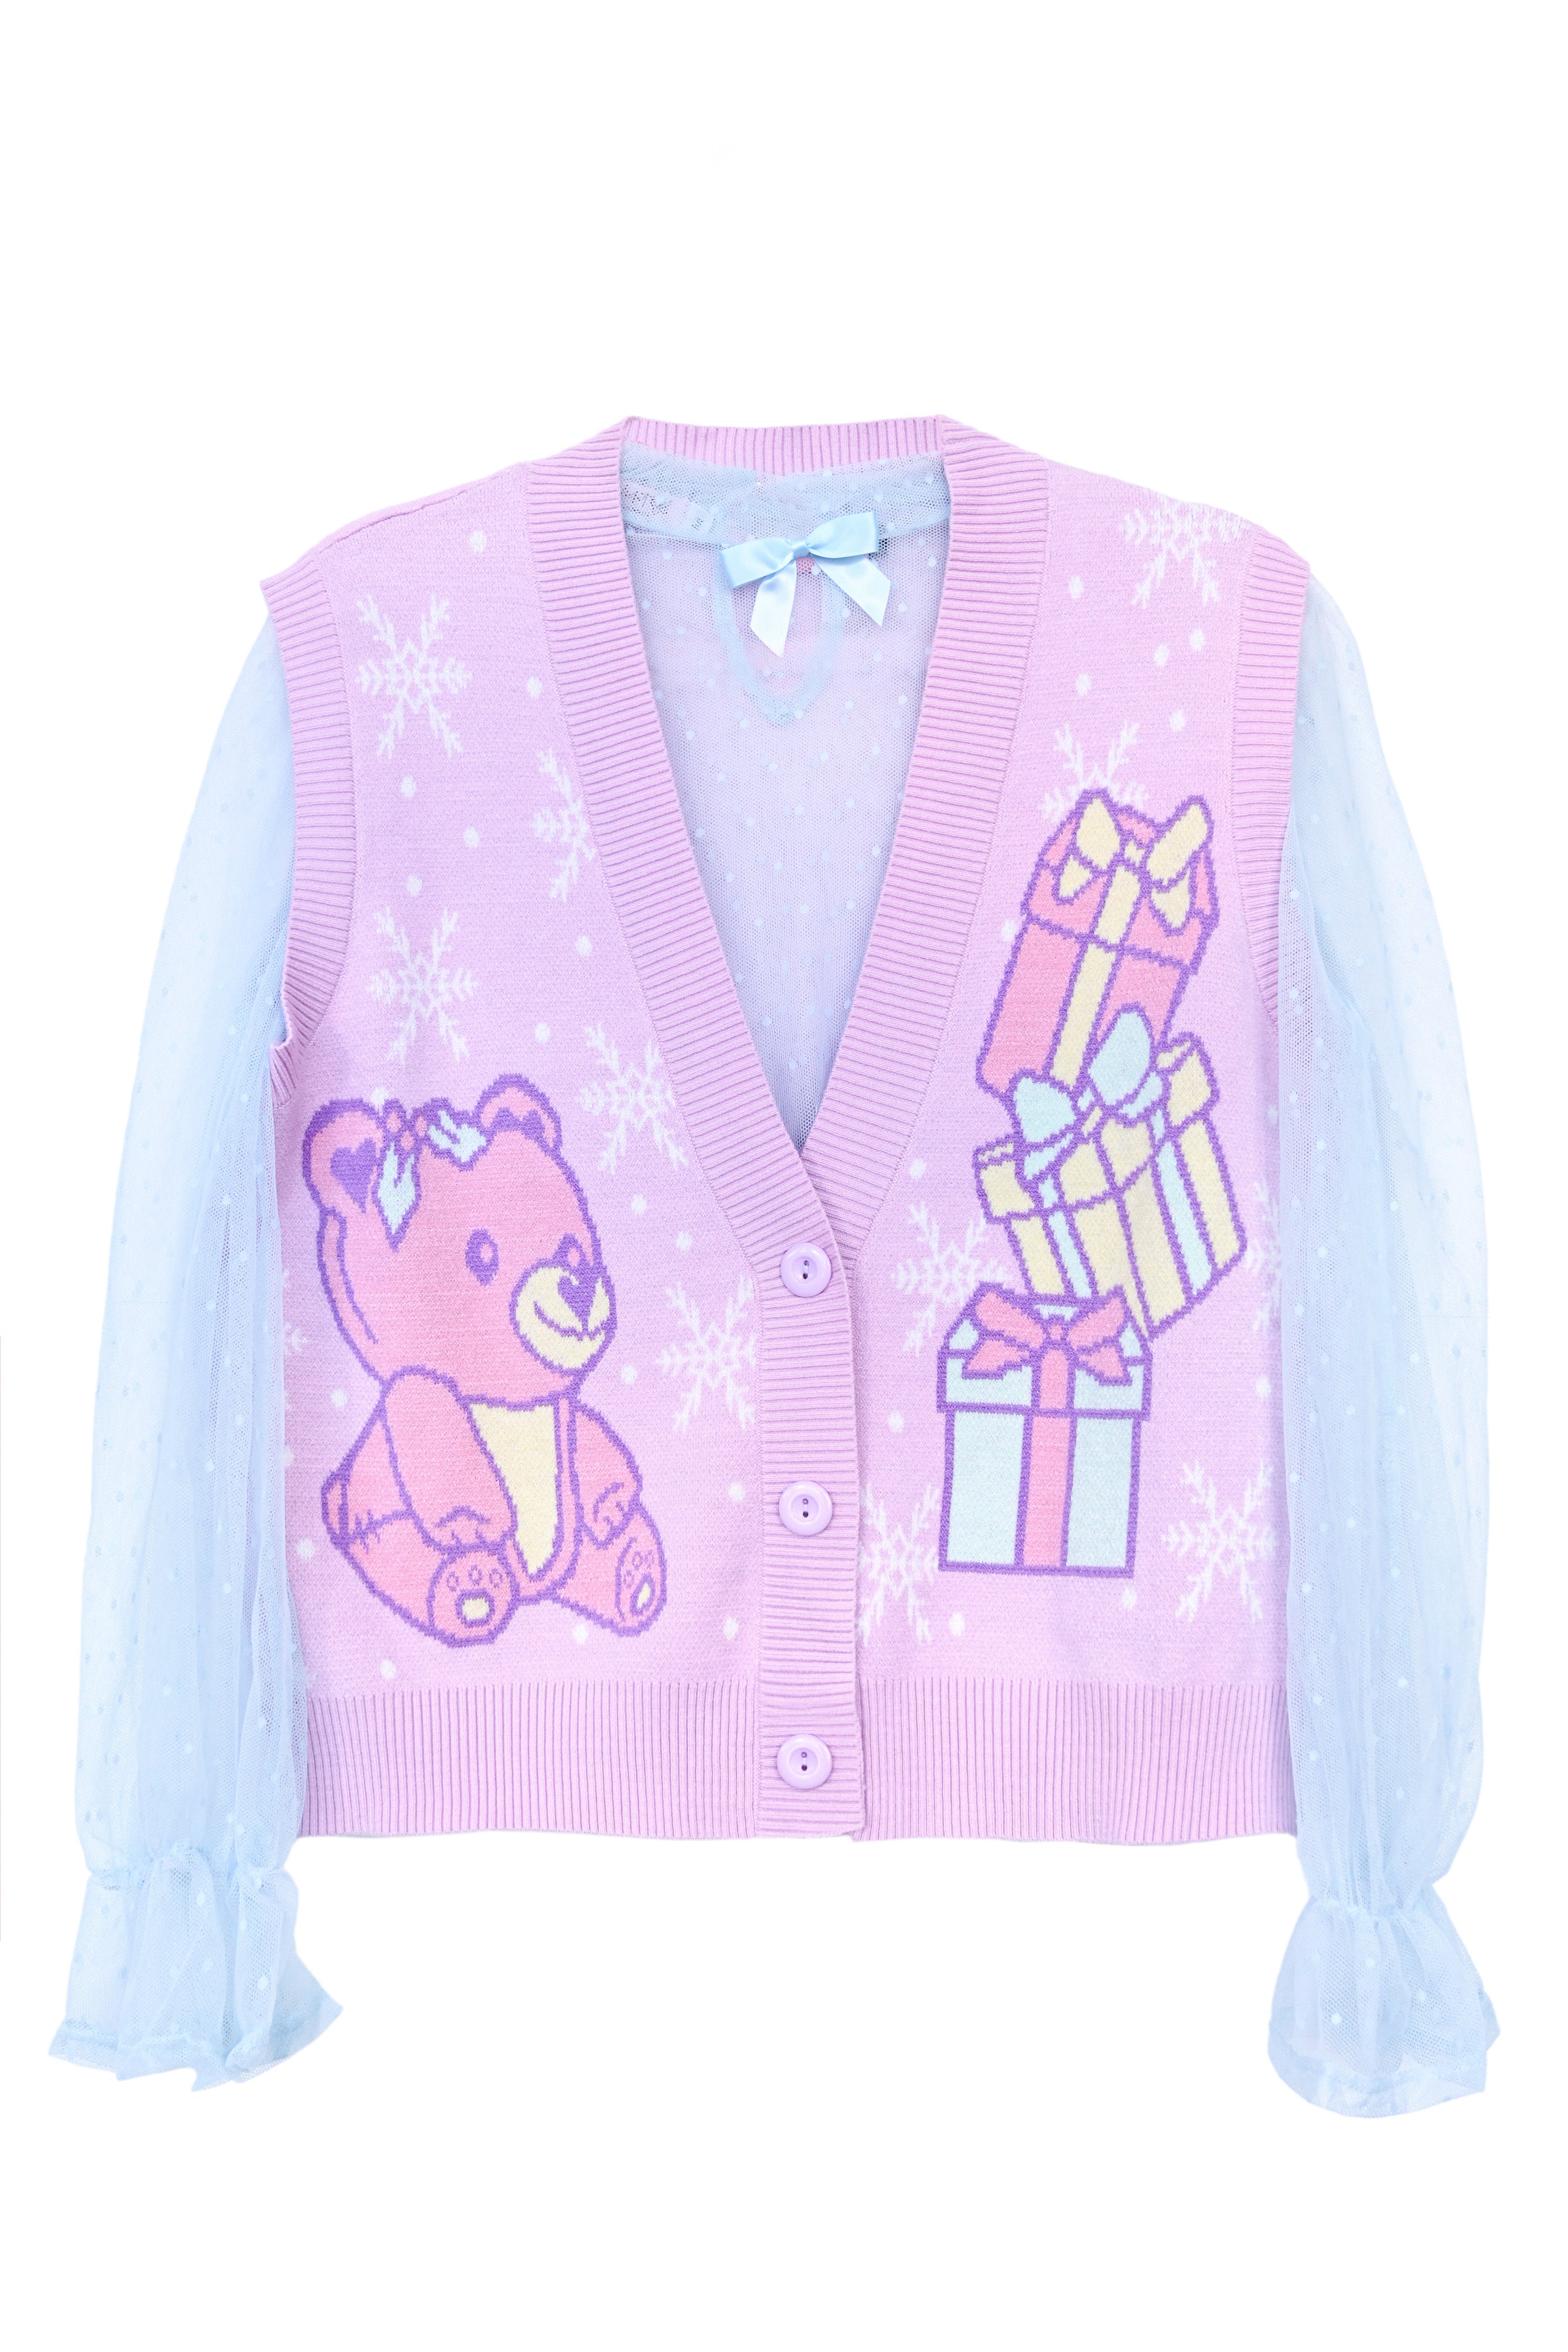 Knit button up sweater vest with pink bear, snowflakes, and gift boxes  Edit alt text